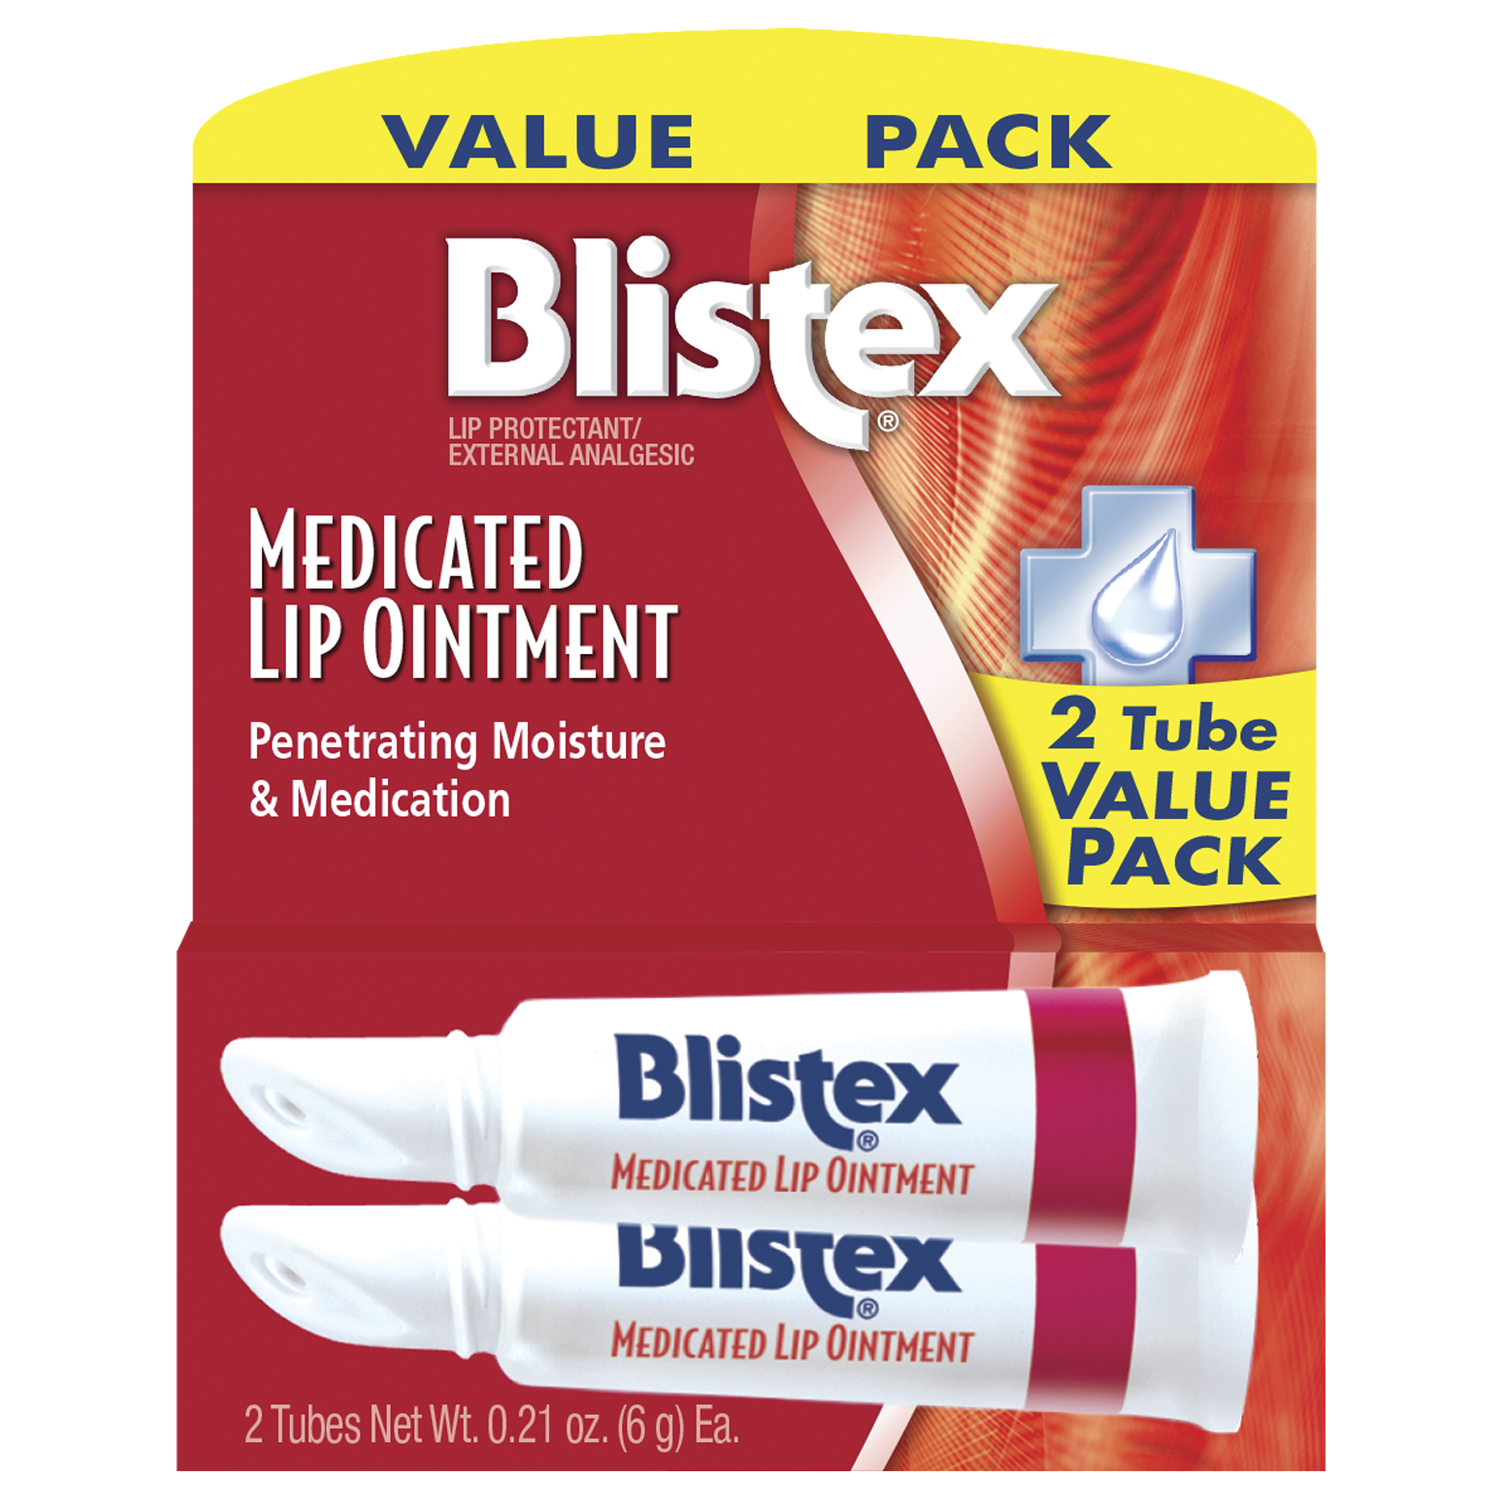 Blistex Medicated Lip Ointment Tube, 0.21 Ounce, Pack of 2 - image 1 of 7